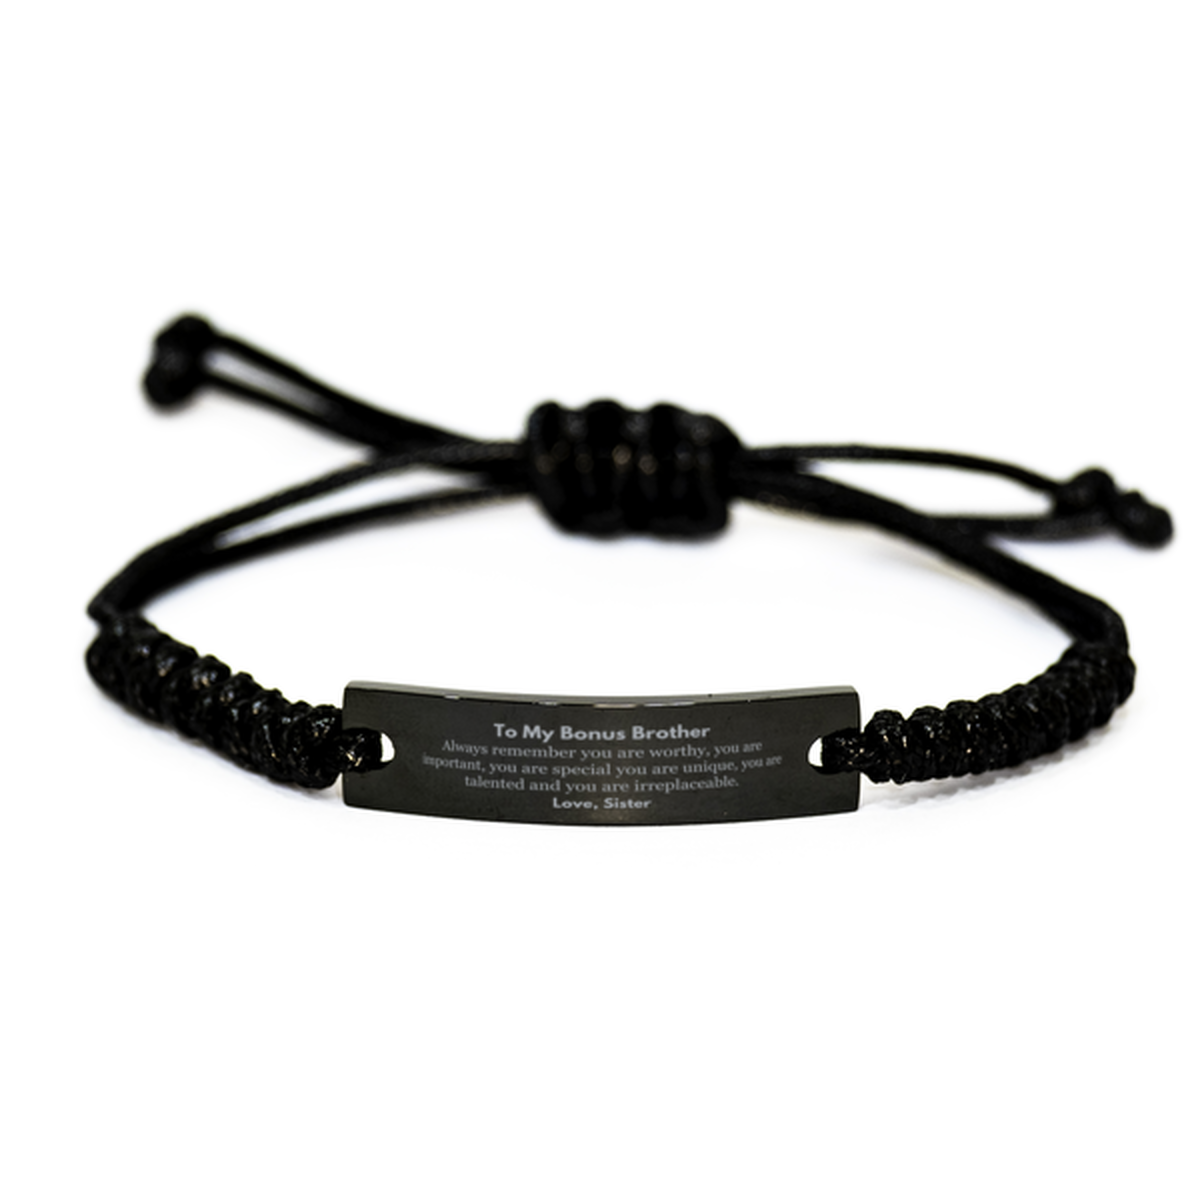 Bonus Brother Birthday Gifts from Sister, Inspirational Black Rope Bracelet for Bonus Brother Christmas Graduation Gifts for Bonus Brother Always remember you are worthy, you are important. Love, Sister